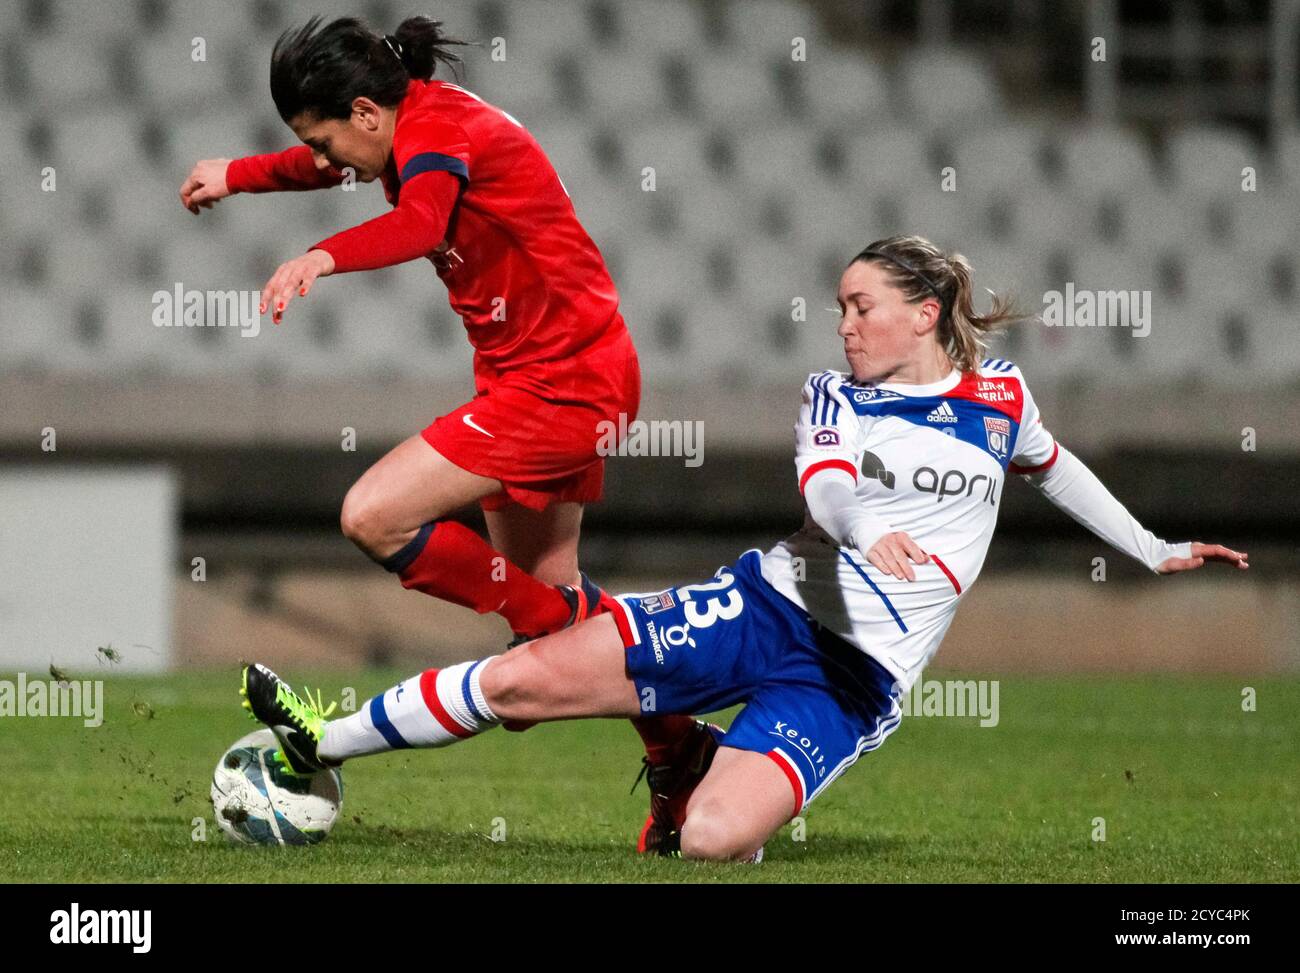 Olympique Lyon's Camille Abily (R) tackles Paris St Germain's Dali Kenza  during their women's Ligue 1 soccer match at Gerland stadium in Lyon March  2, 2013. Lyon defeated Paris 3-0 and is